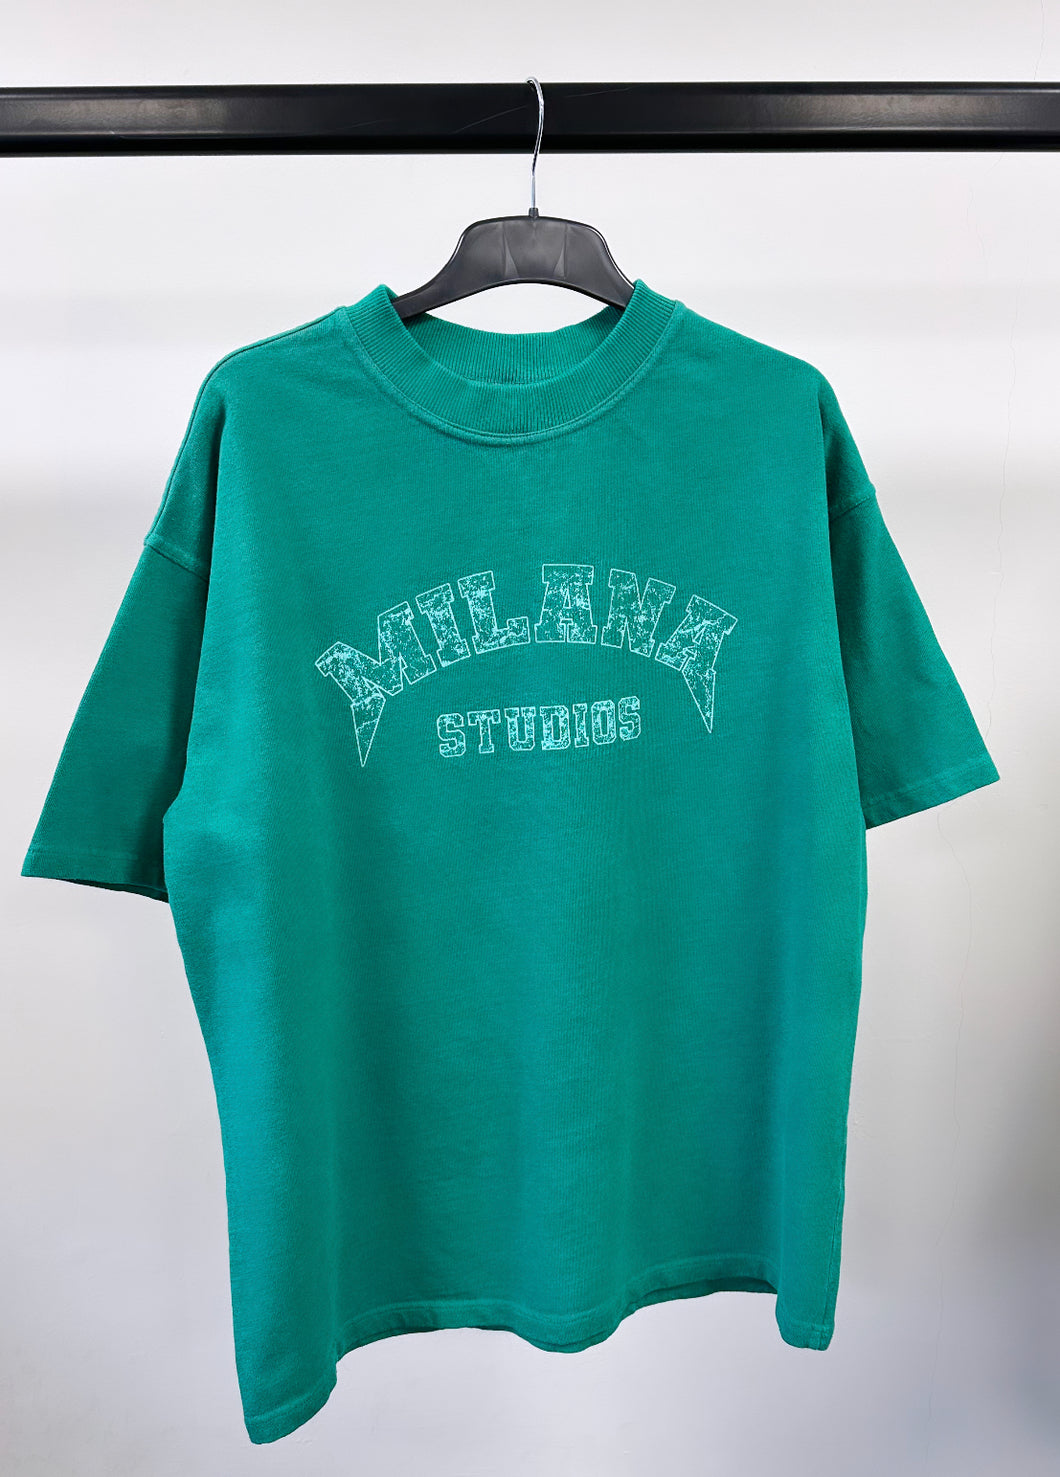 Washed Teal Arch Heavyweight T-shirt.